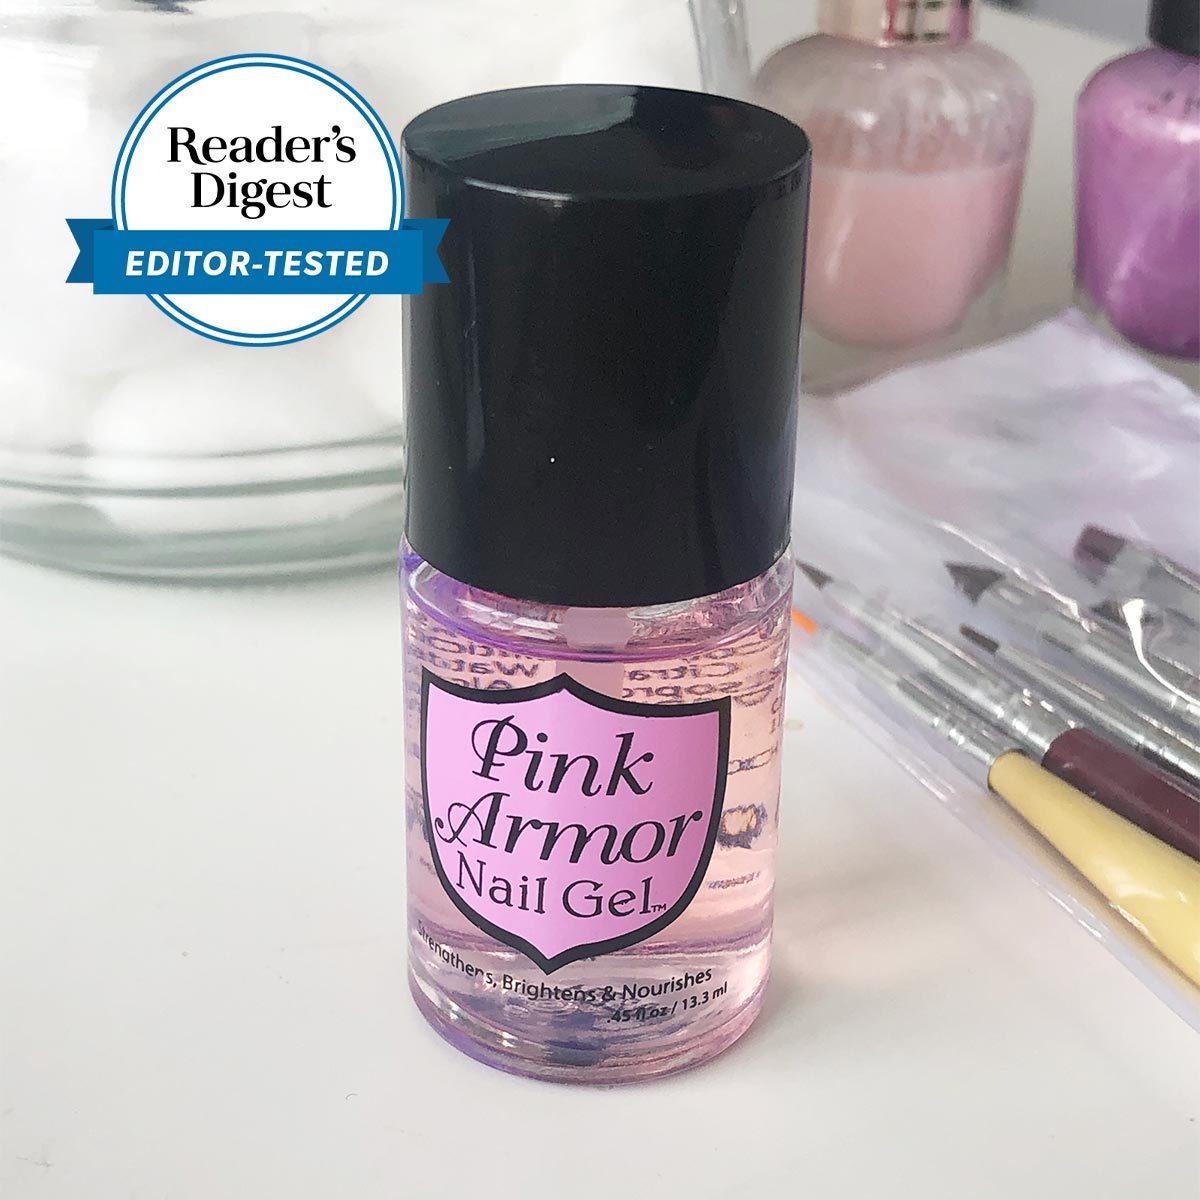 https://www.rd.com/wp-content/uploads/2023/05/RD-Editor-Tested-Square-pink-armor-nail-gel-Andrea-Carrillo-Jvedit.jpg?fit=700%2C700